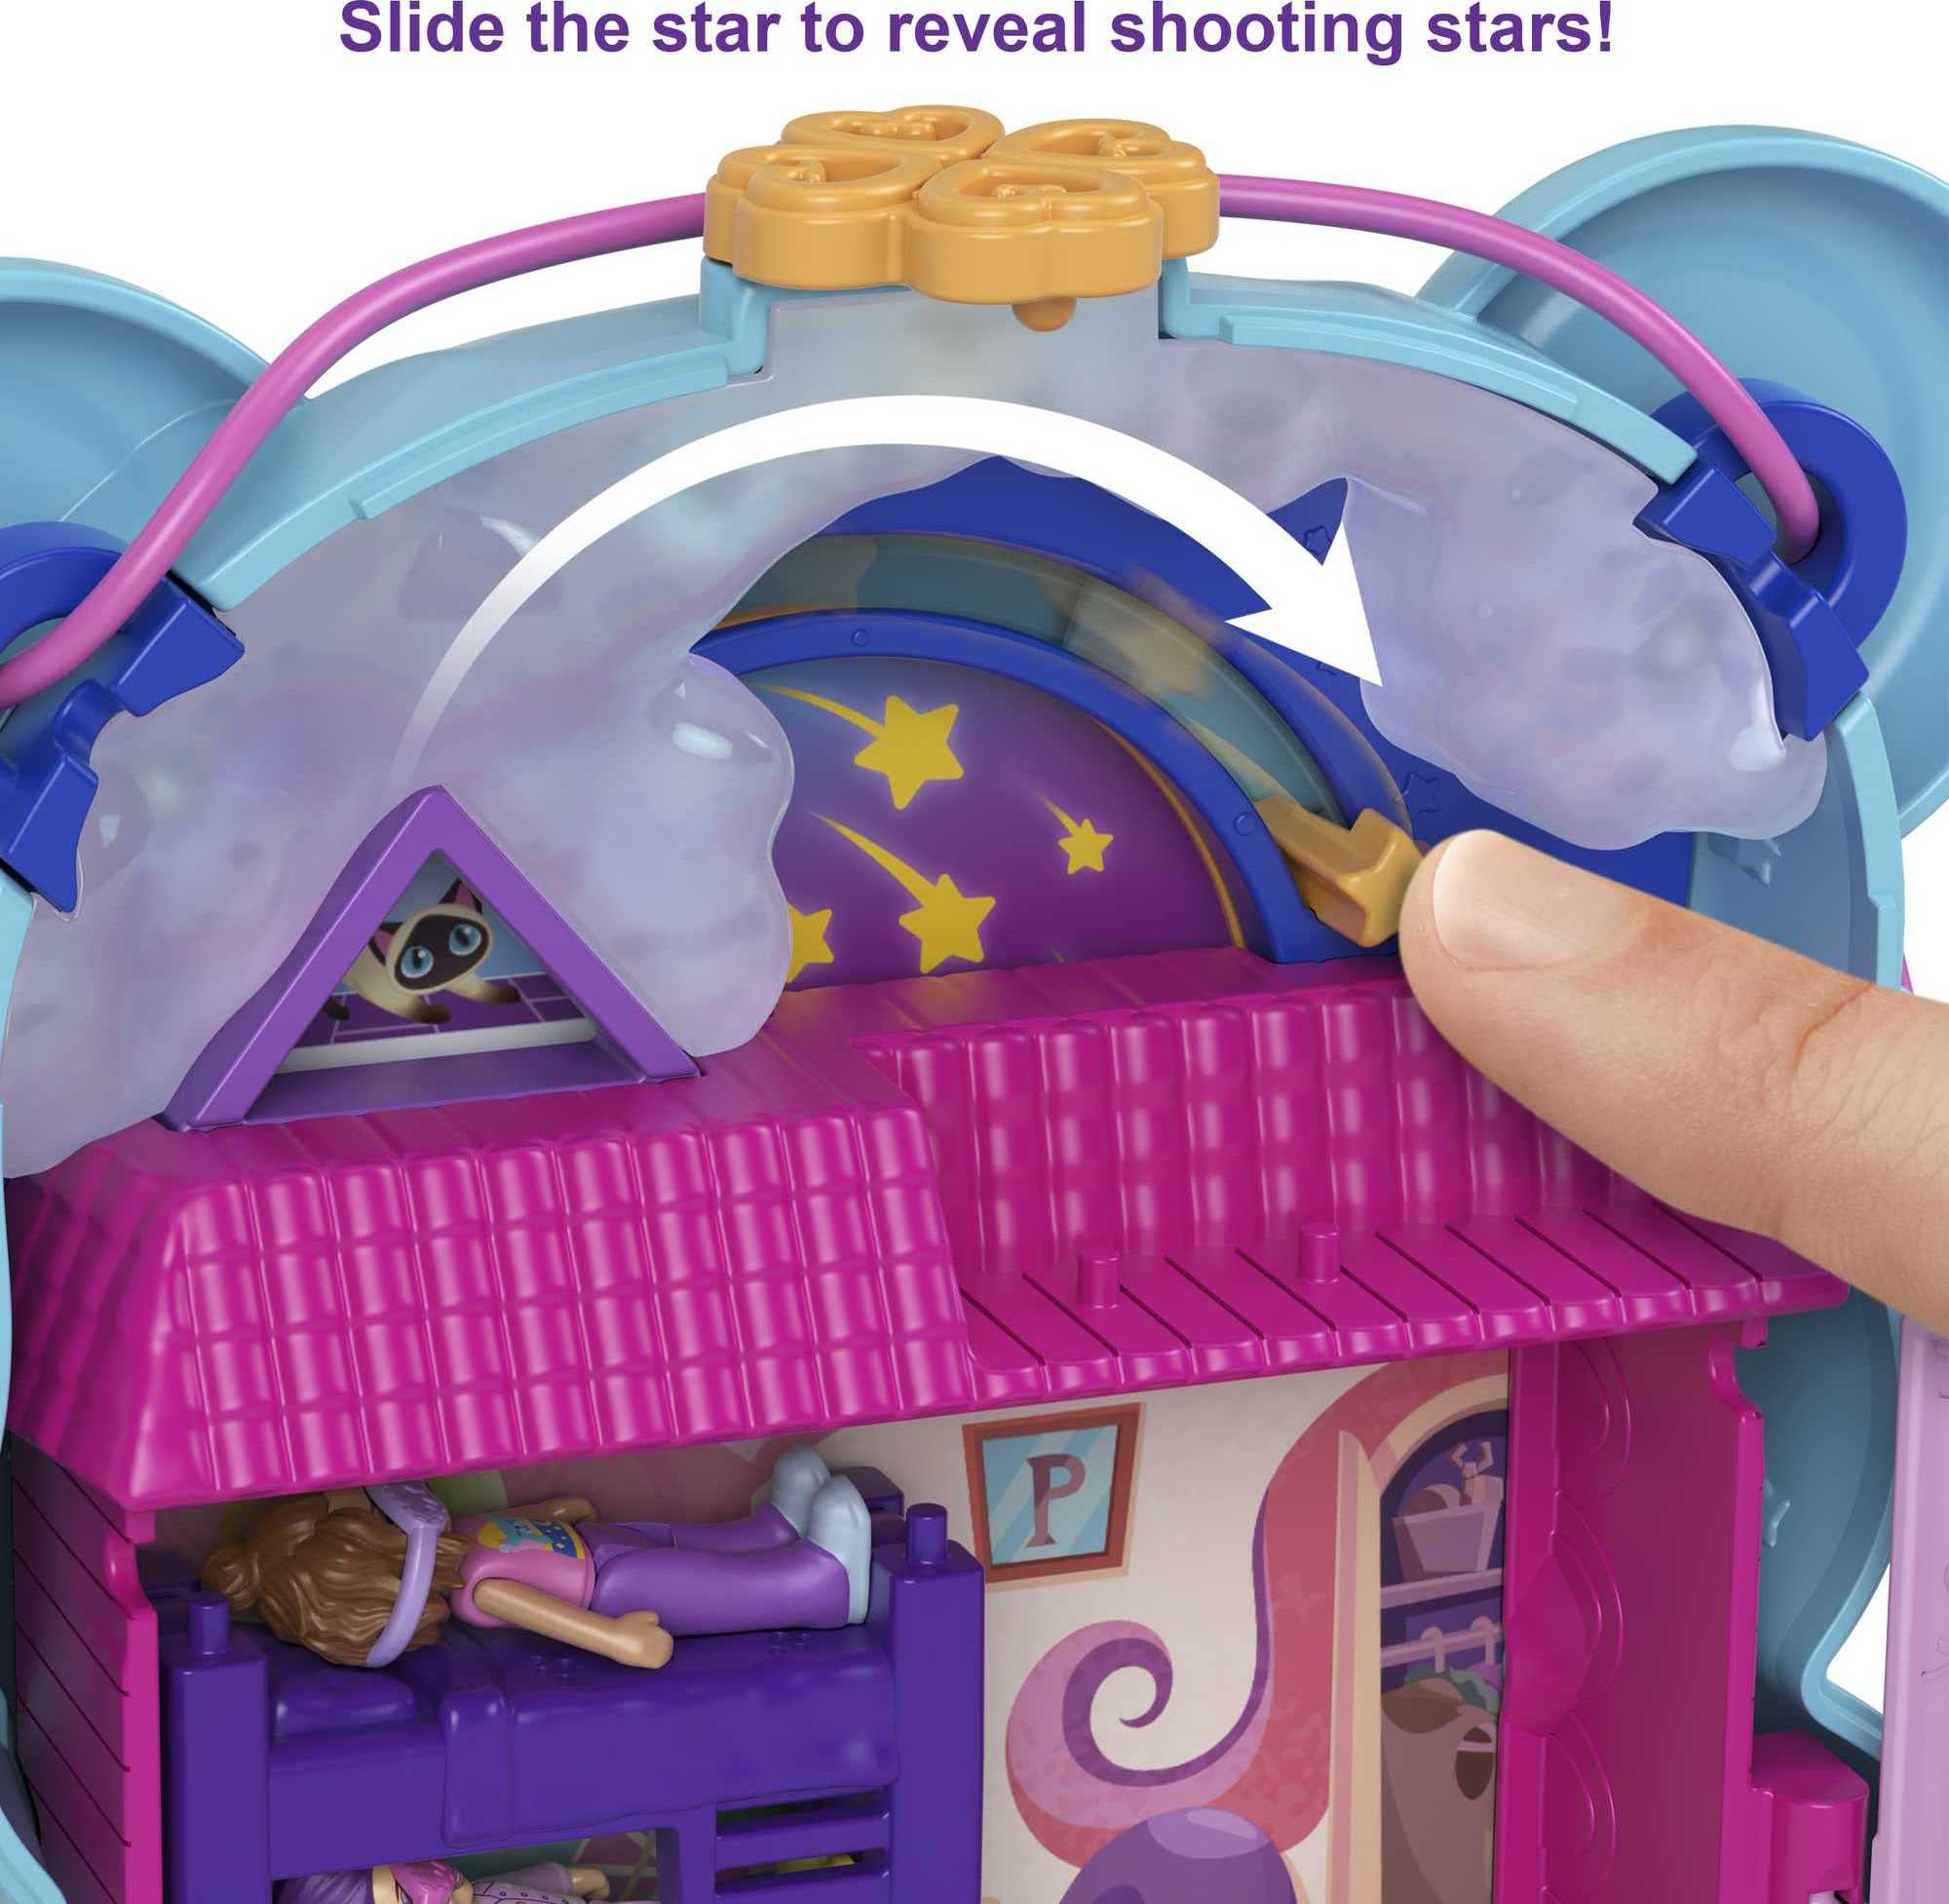 Polly Pocket 2-In-1 Travel Toy, 2 Micro Dolls and 16 Accessories, Teddy Bear Purse Playset with Sleepover Theme